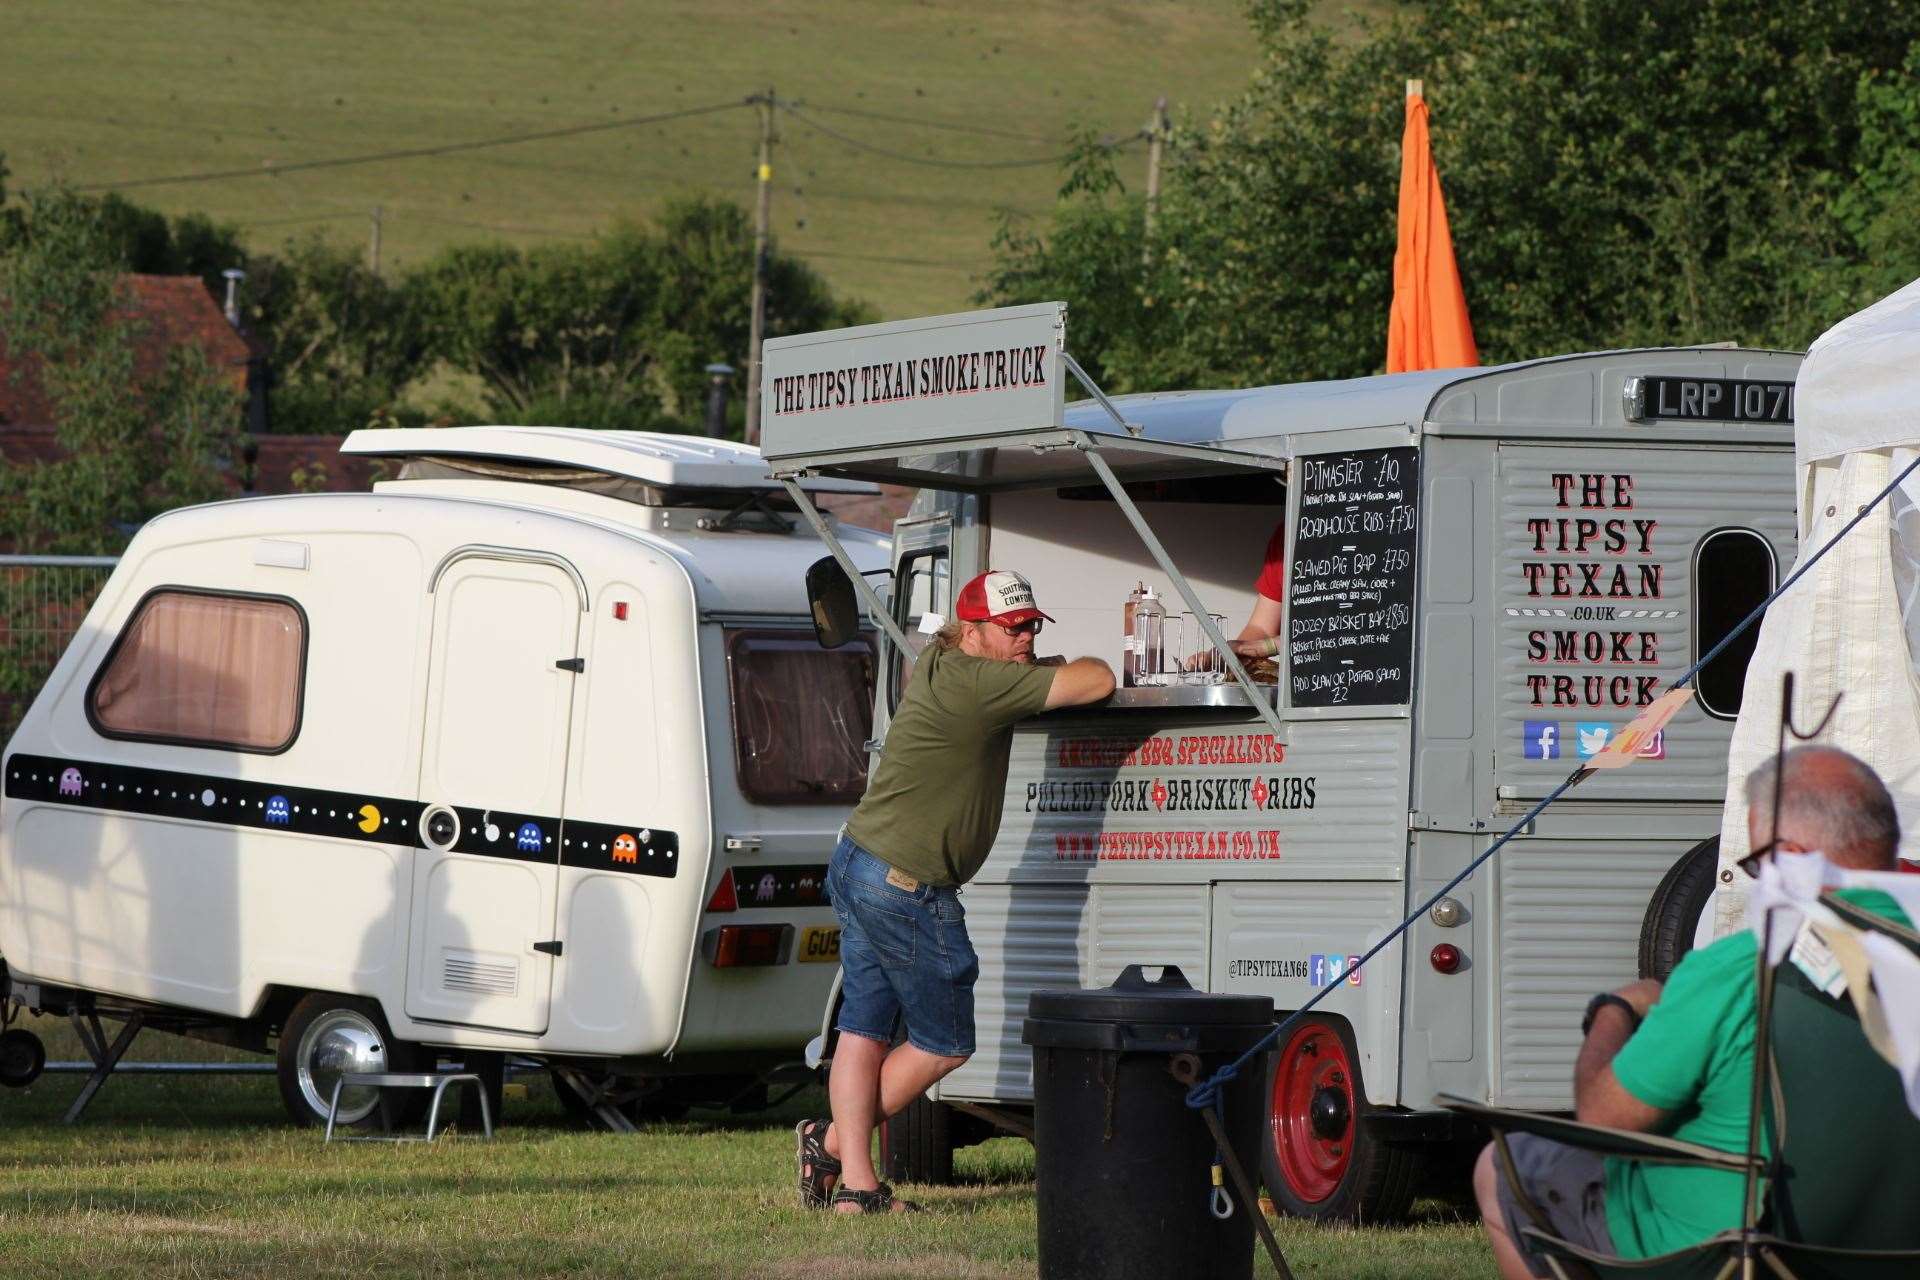 Food wagon at the Chickenstock music festival at Stockbury. Picture: John Nurden (14091669)